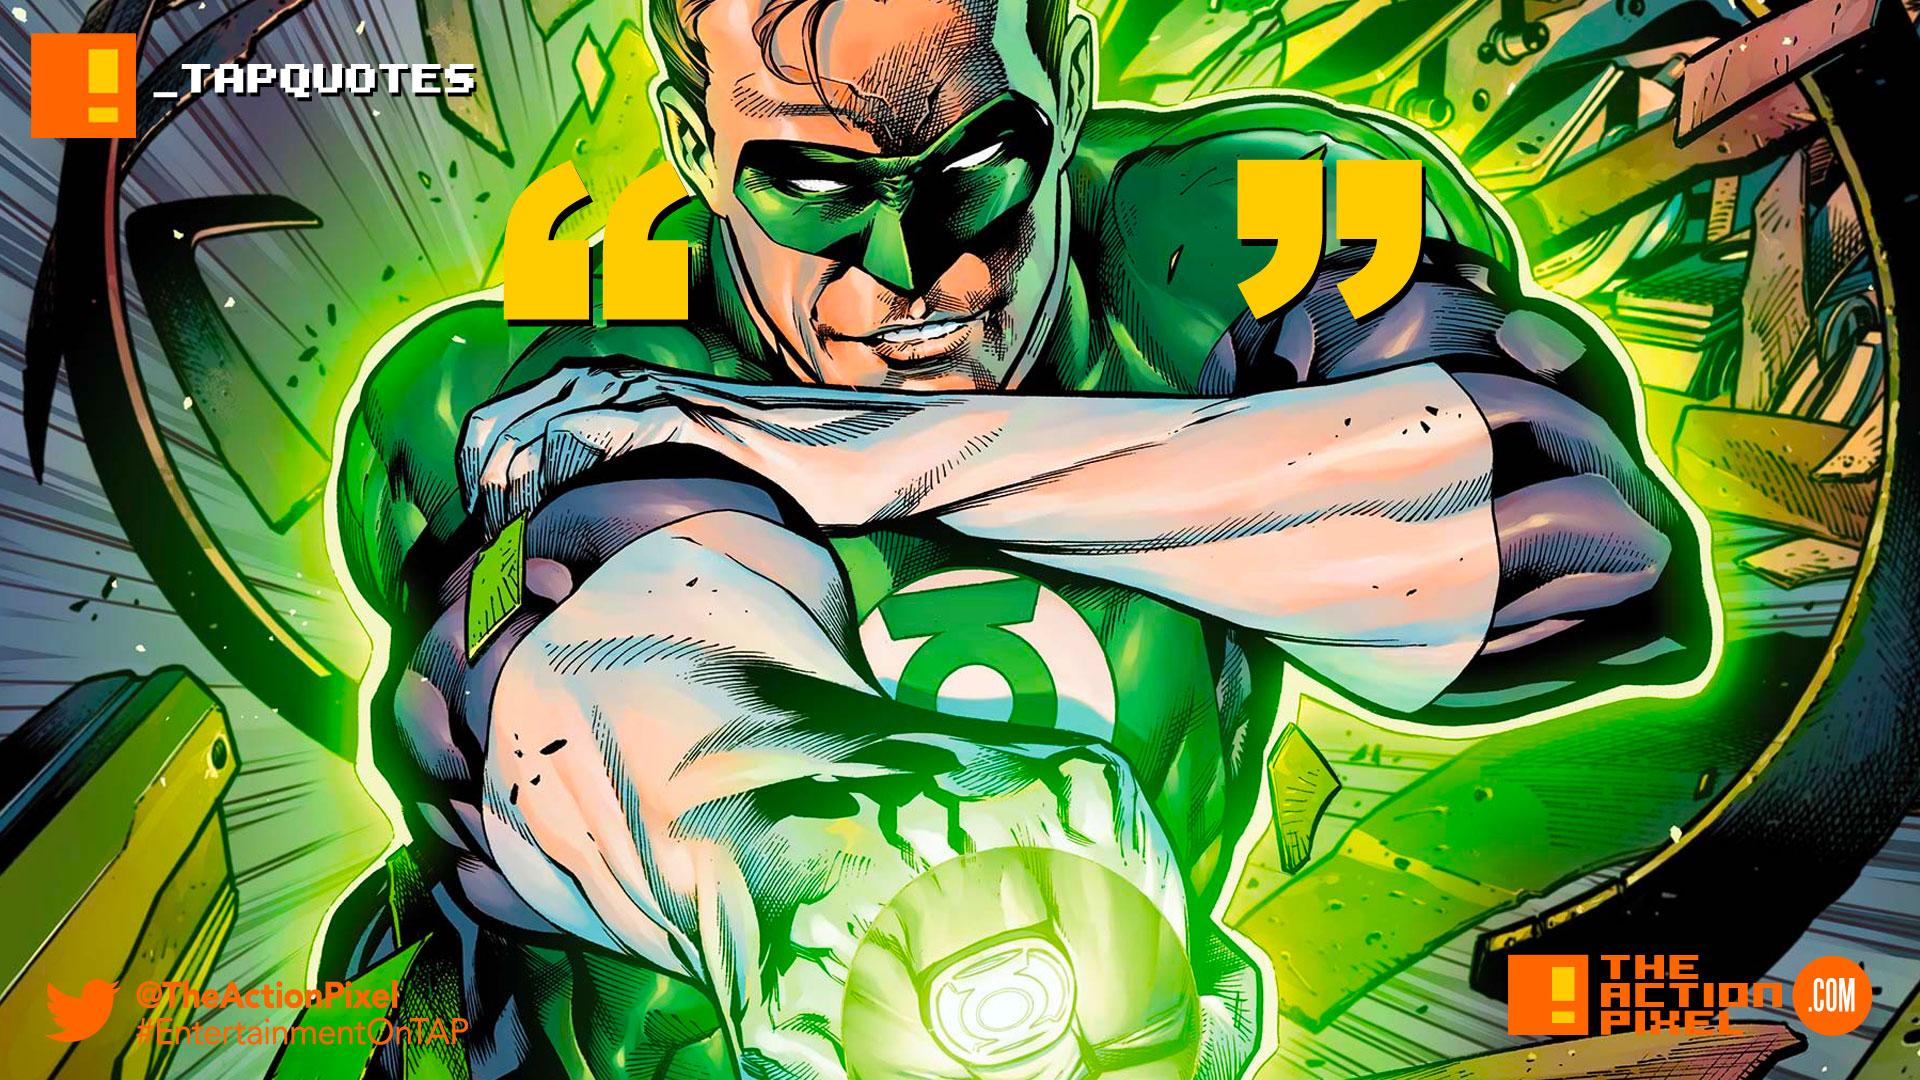 TAPQuotes. The Green Lantern Oath is no ordinary mantra